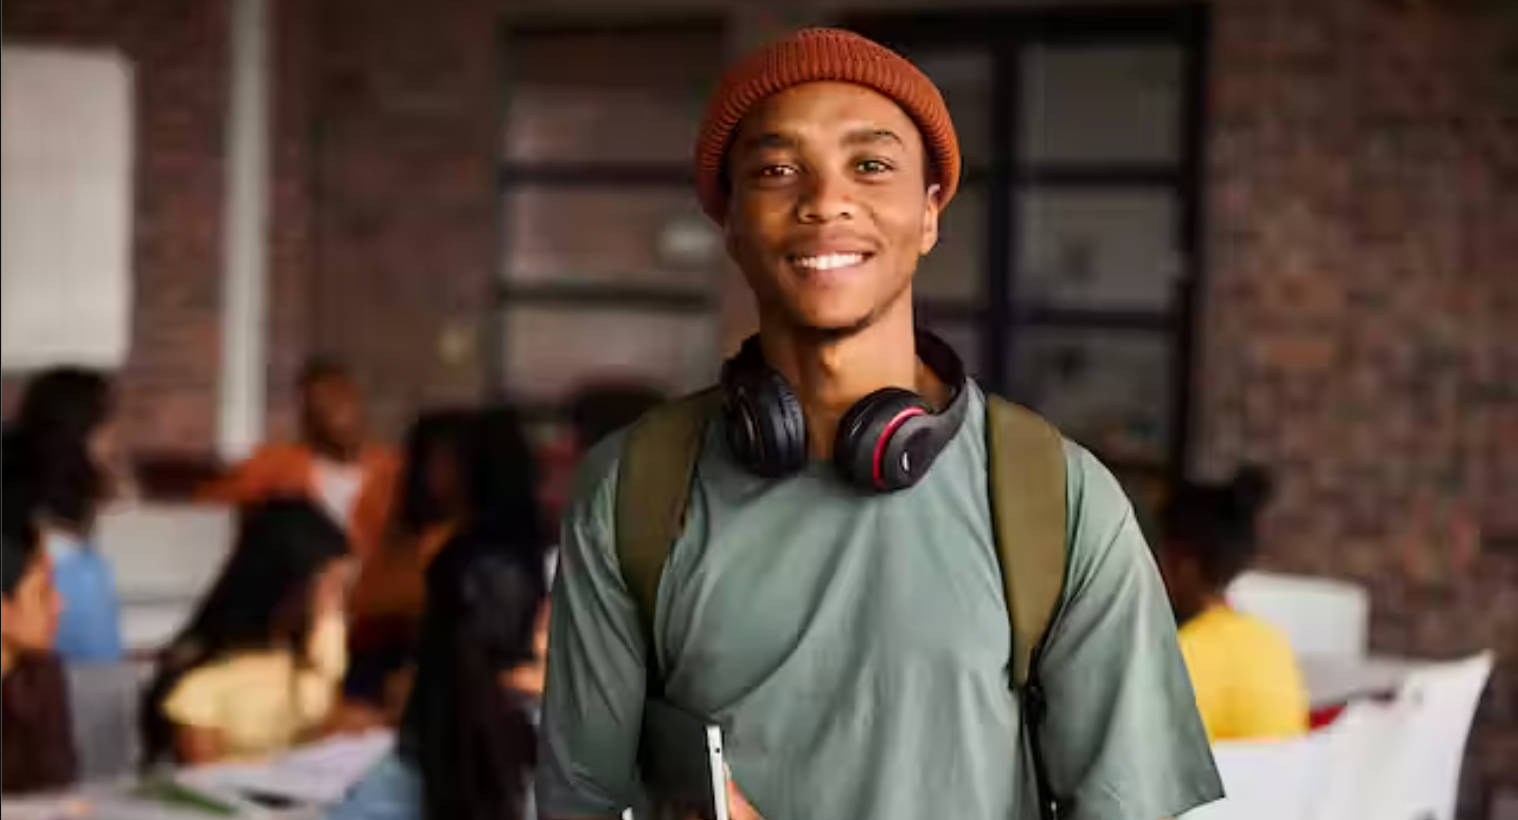 A man wearing a green shirt and orange hat with headphones around his neck smiles for the camera